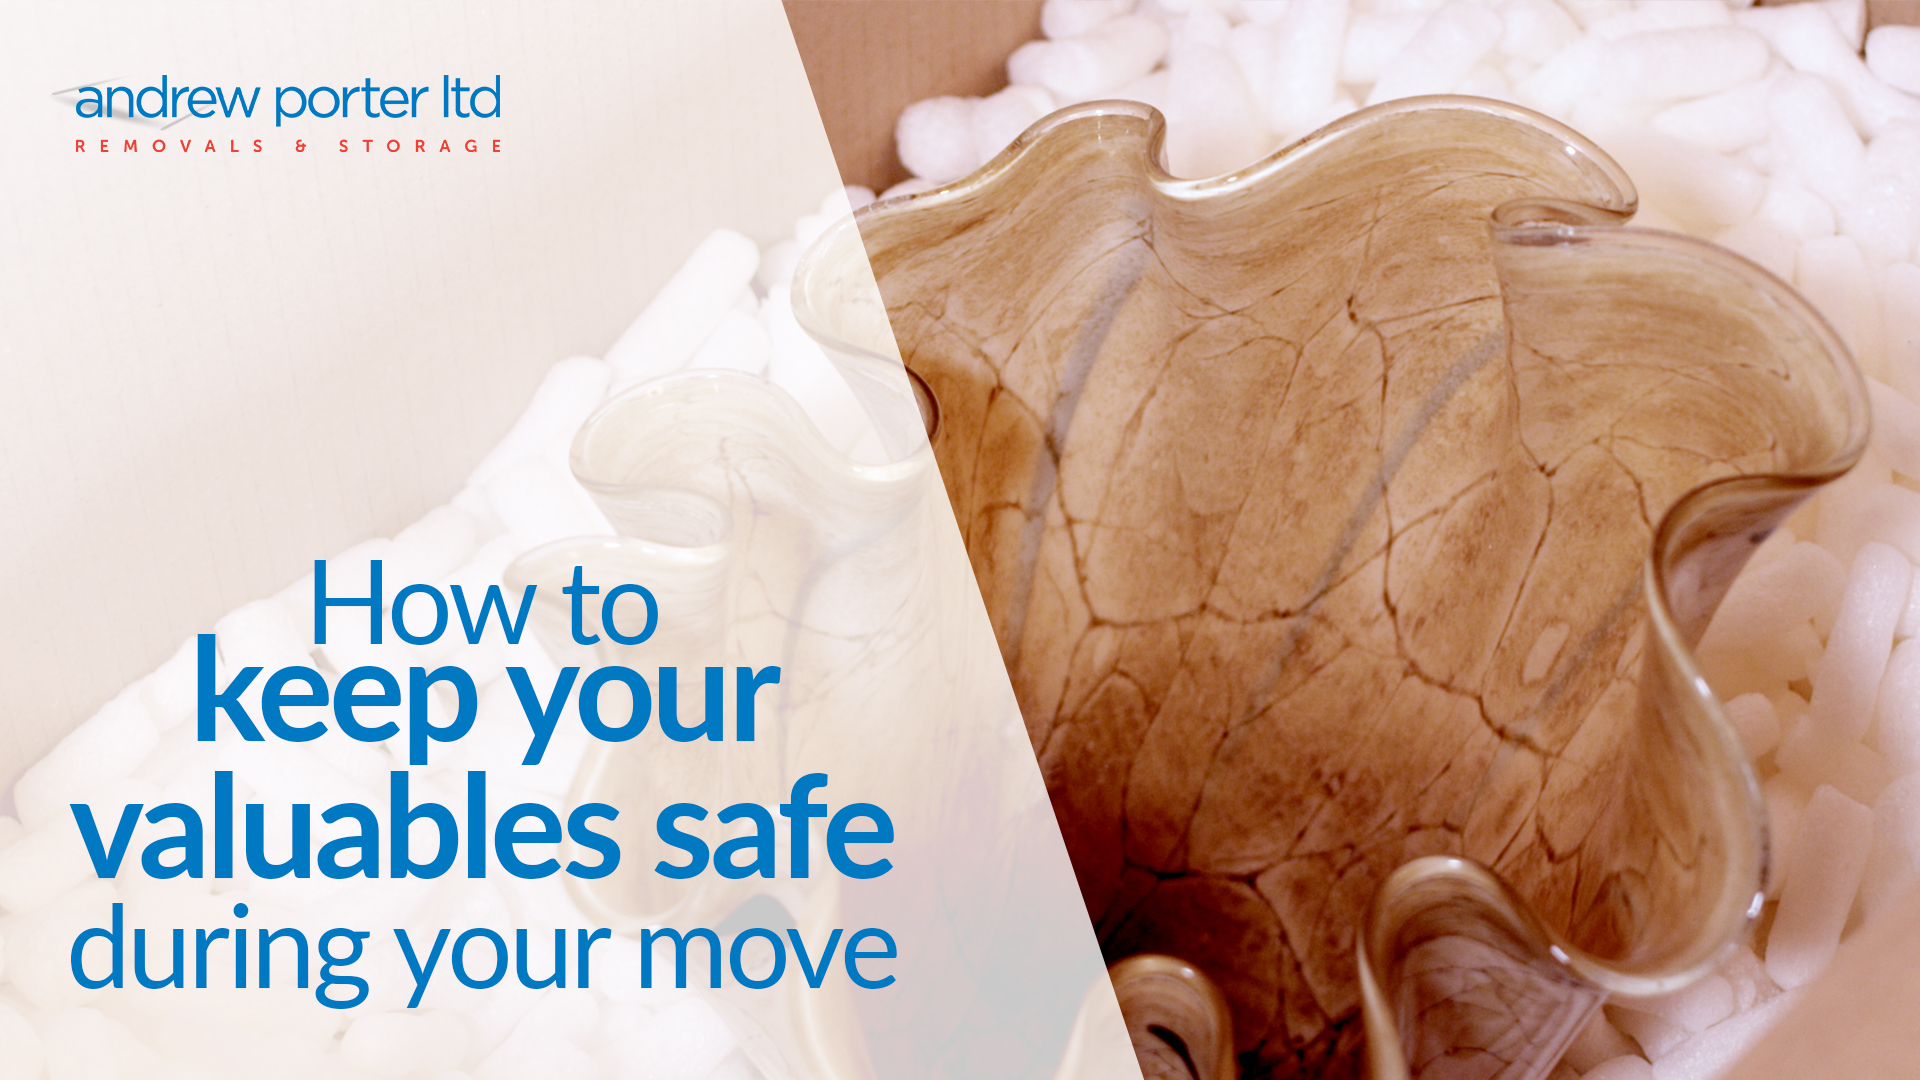 Keeping valuables safe during your move